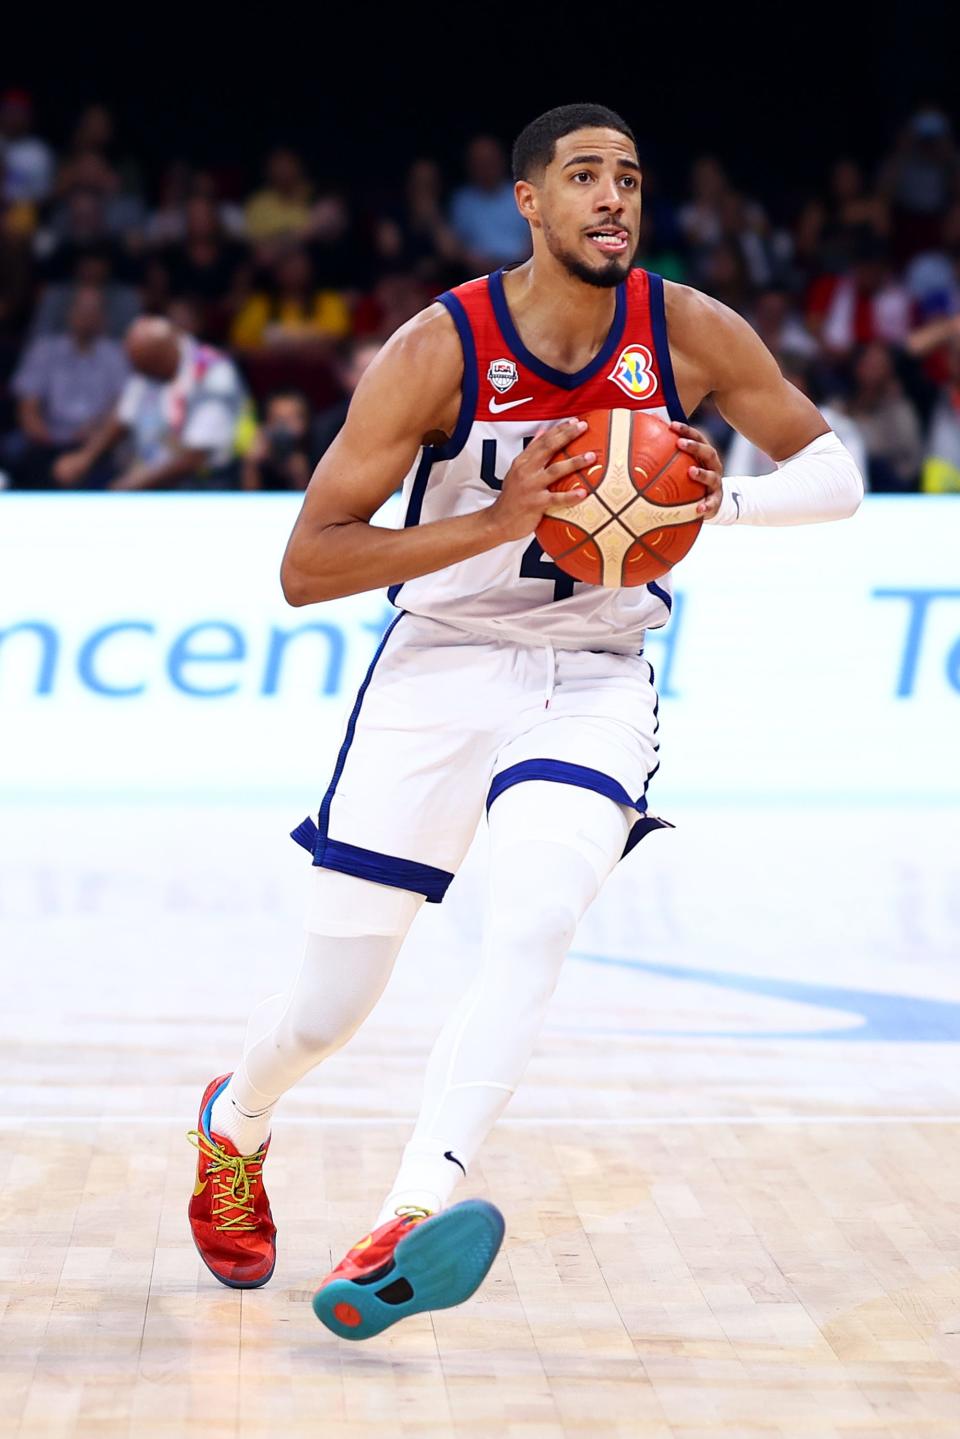 MANILA, PHILIPPINES - SEPTEMBER 10: Tyrese Haliburton #4 of the United States looks for a pass in the third quarter during the FIBA Basketball World Cup 3rd Place game against Canada at Mall of Asia Arena on September 10, 2023 in Manila, Philippines.